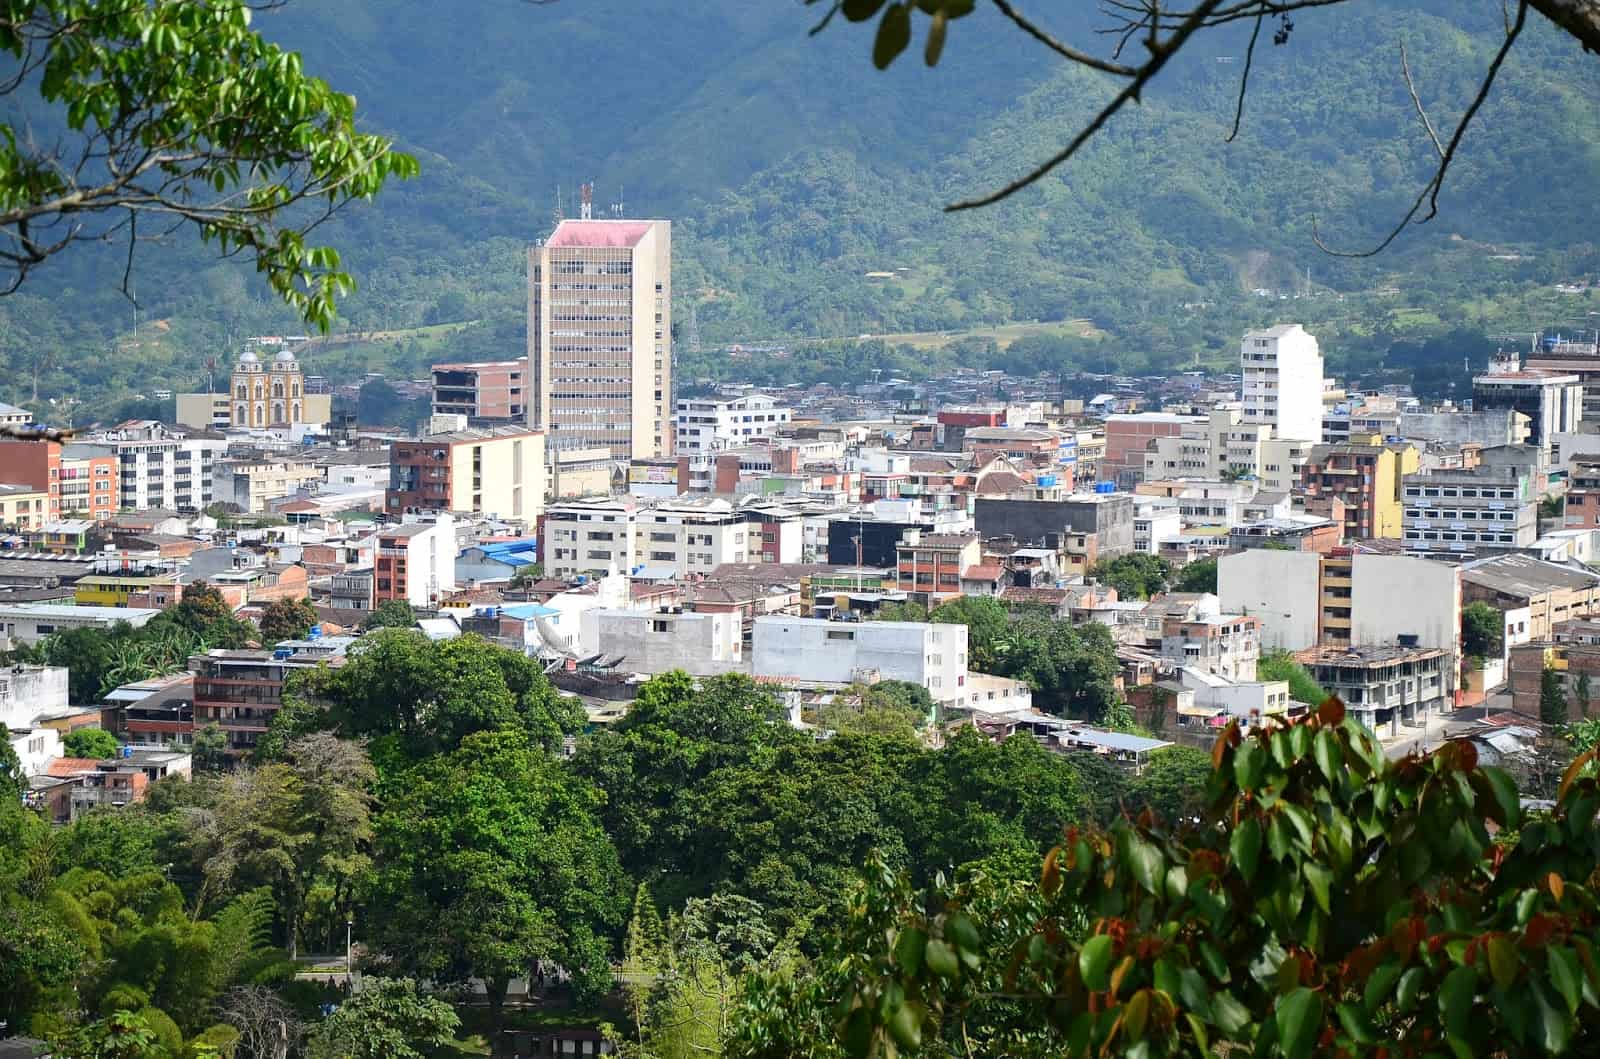 View from Sugarloaf Hill in Ibagué, Tolima, Colombia